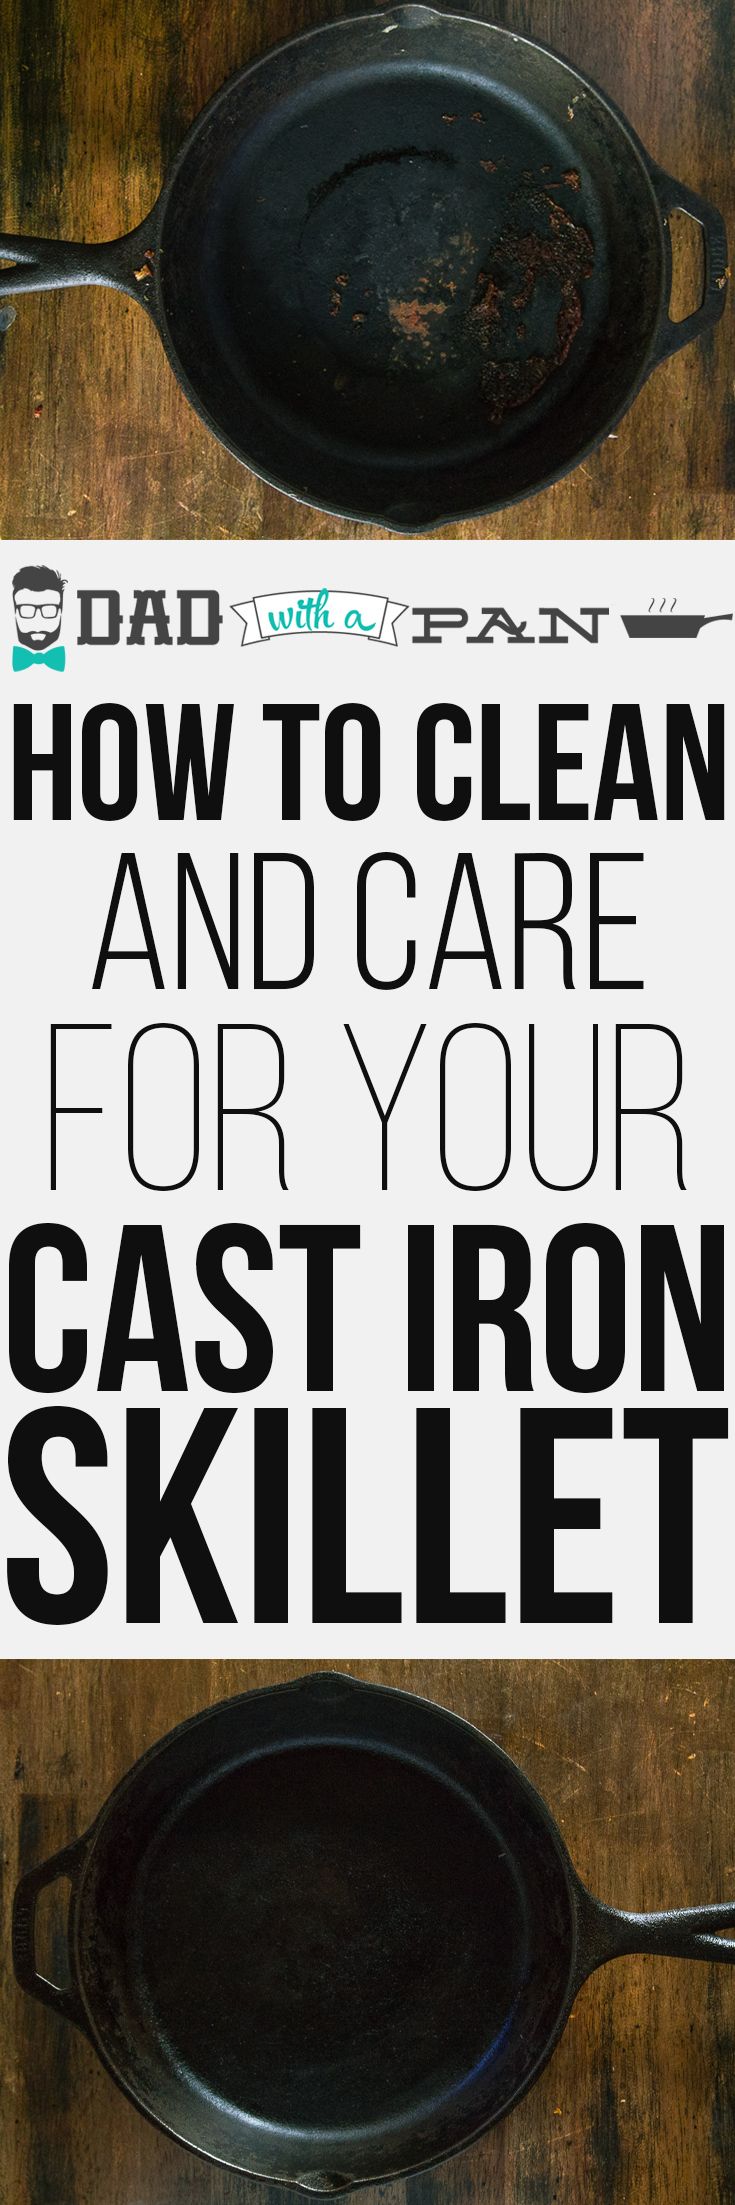 How-To-Clean-And-Care-For-Your-Cast-Iron-Skillet-pinterest